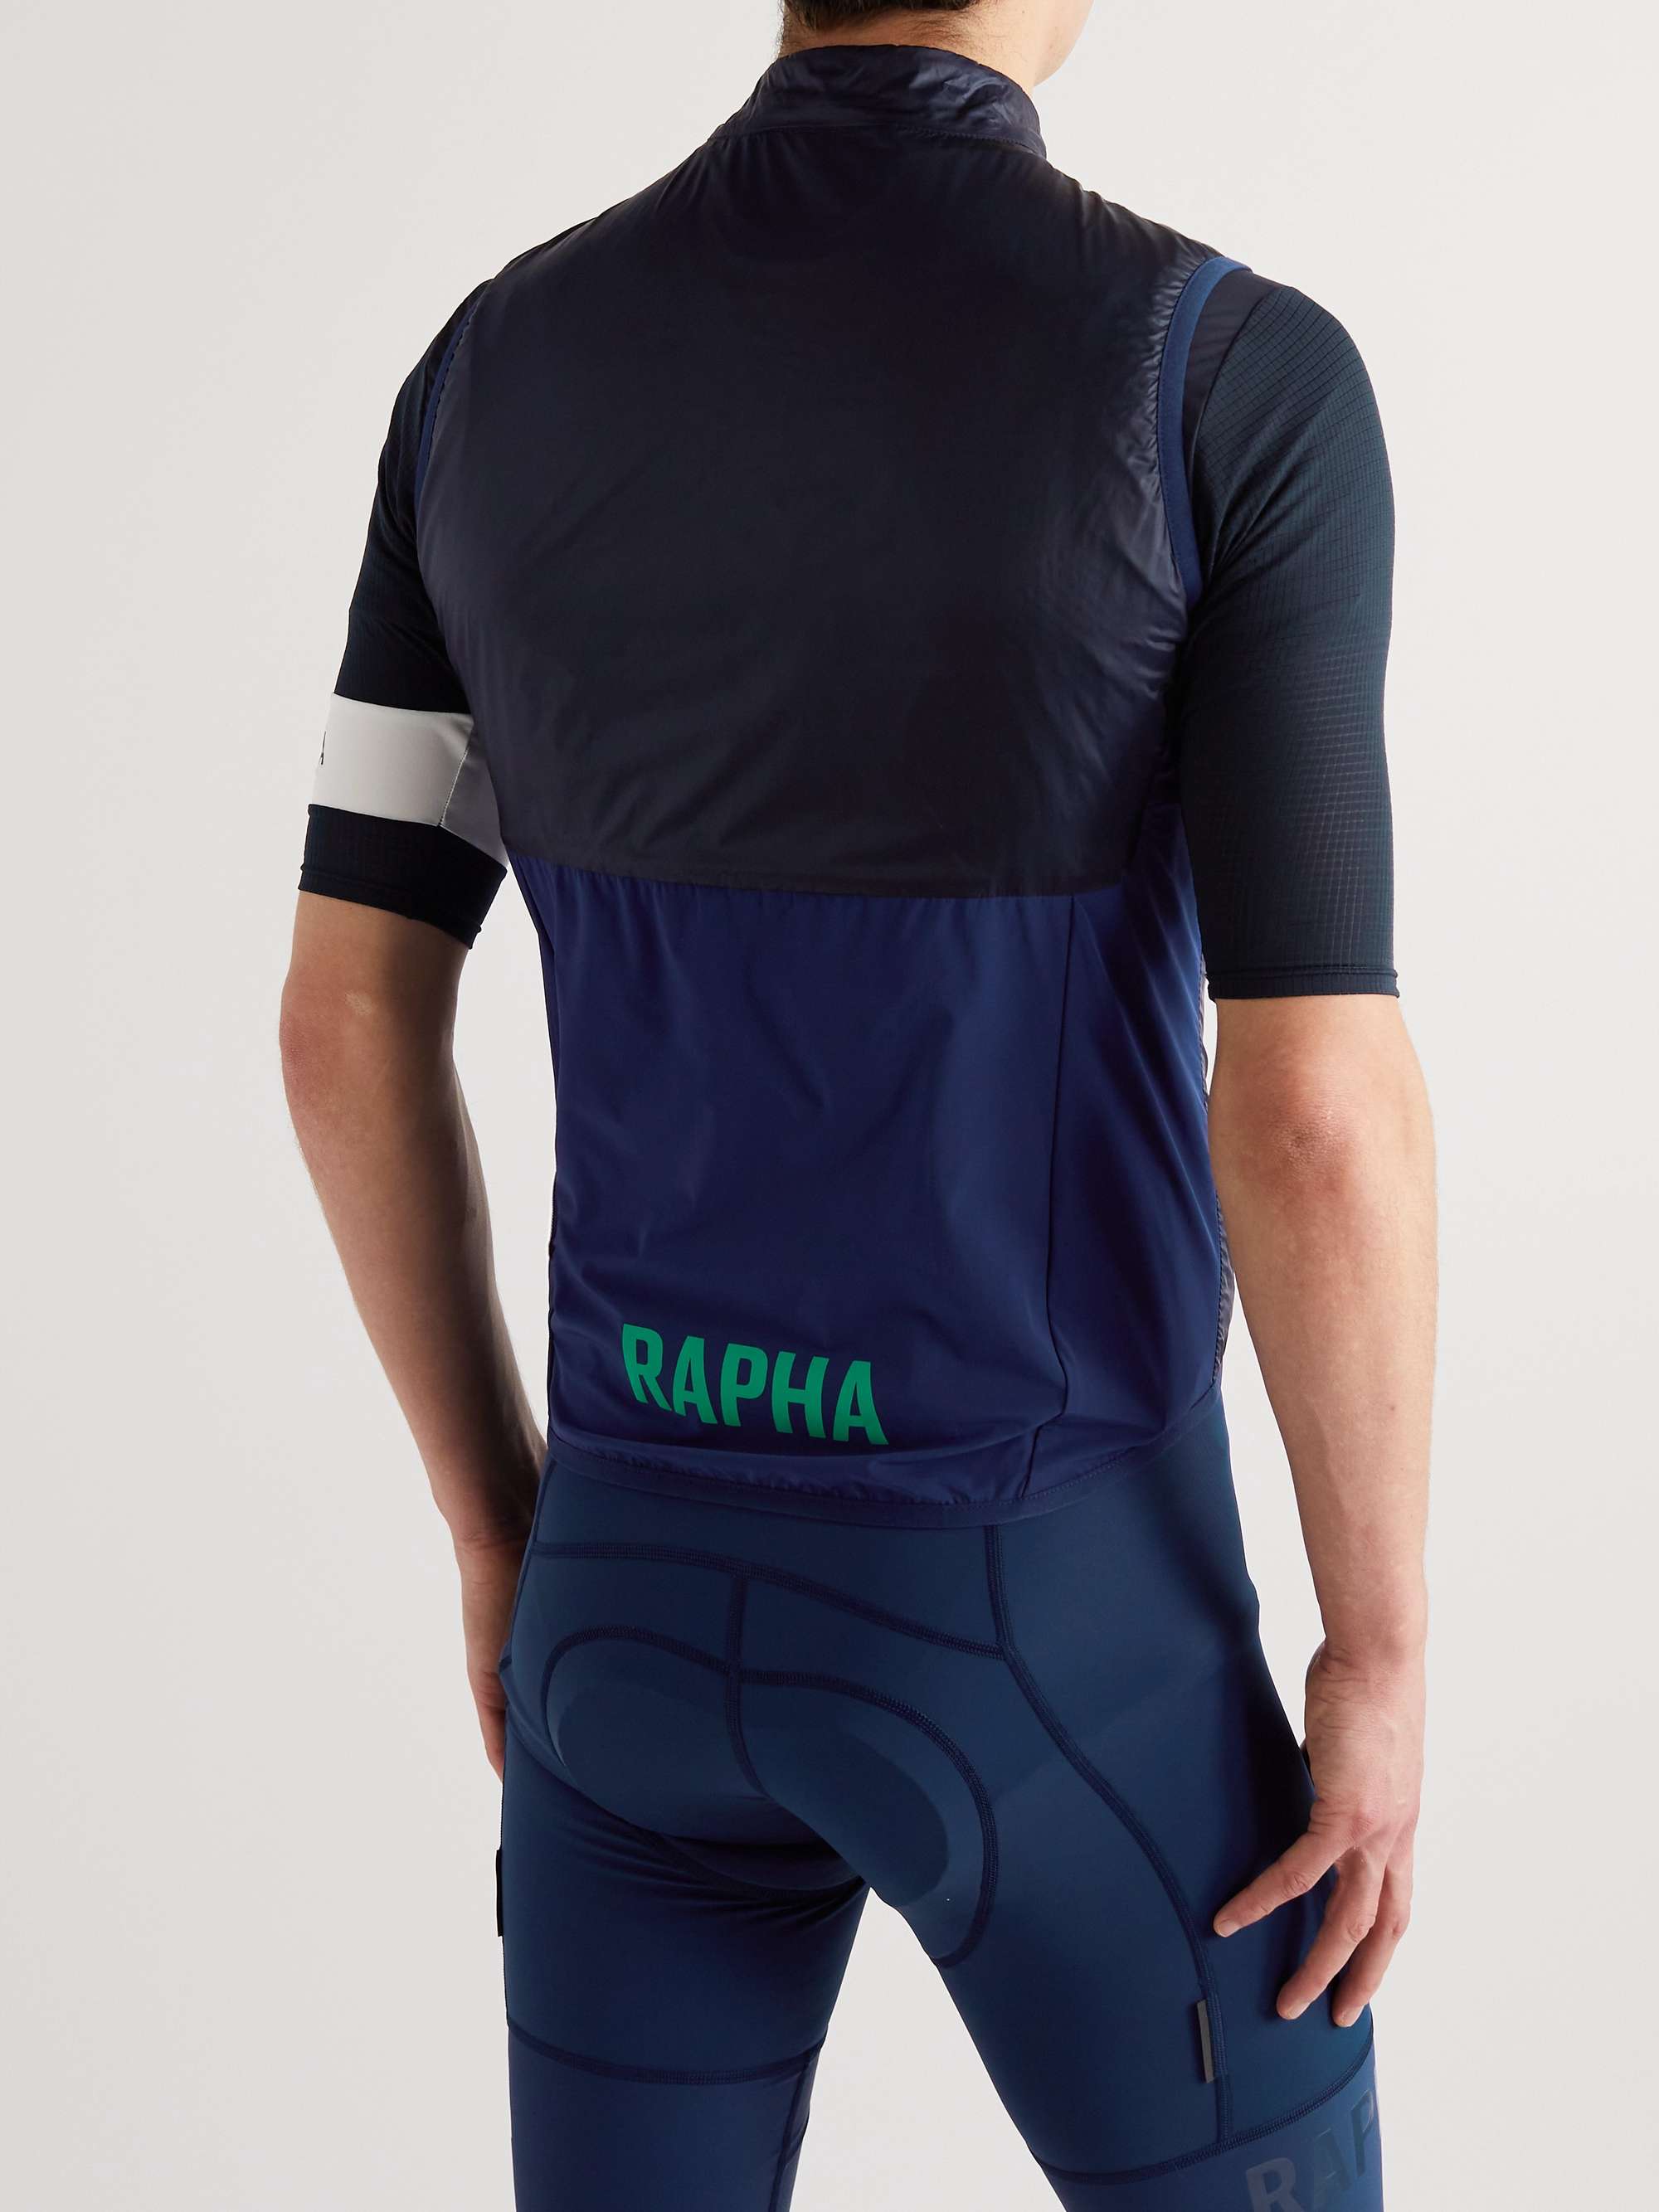 RAPHA Pro Team Insulated Shell Cycling Gilet